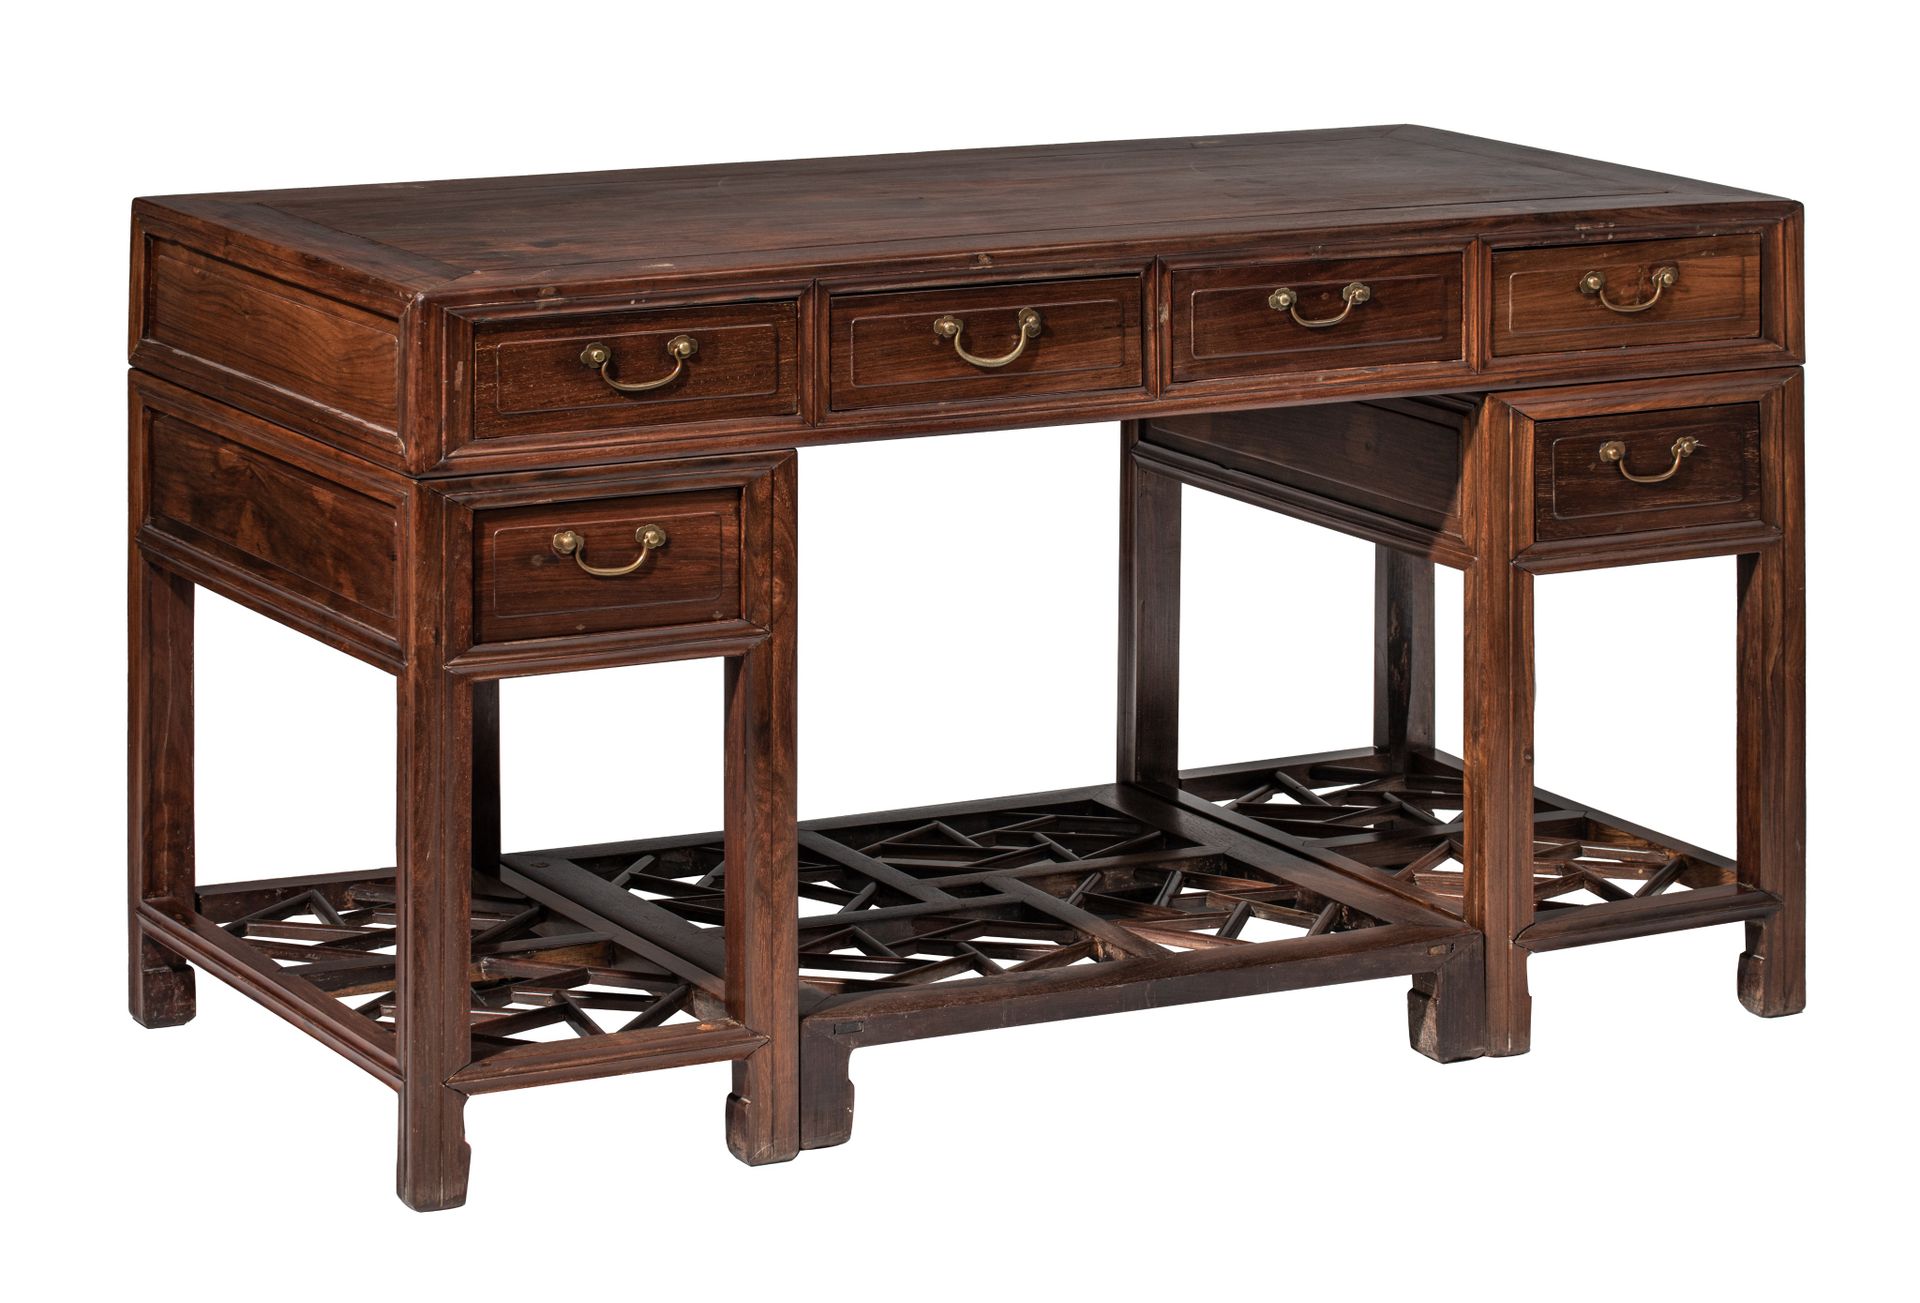 A Chinese hardwood desk, 20thC, H 83 - 144 x 72 cm Scrivania cinese in legno dur&hellip;